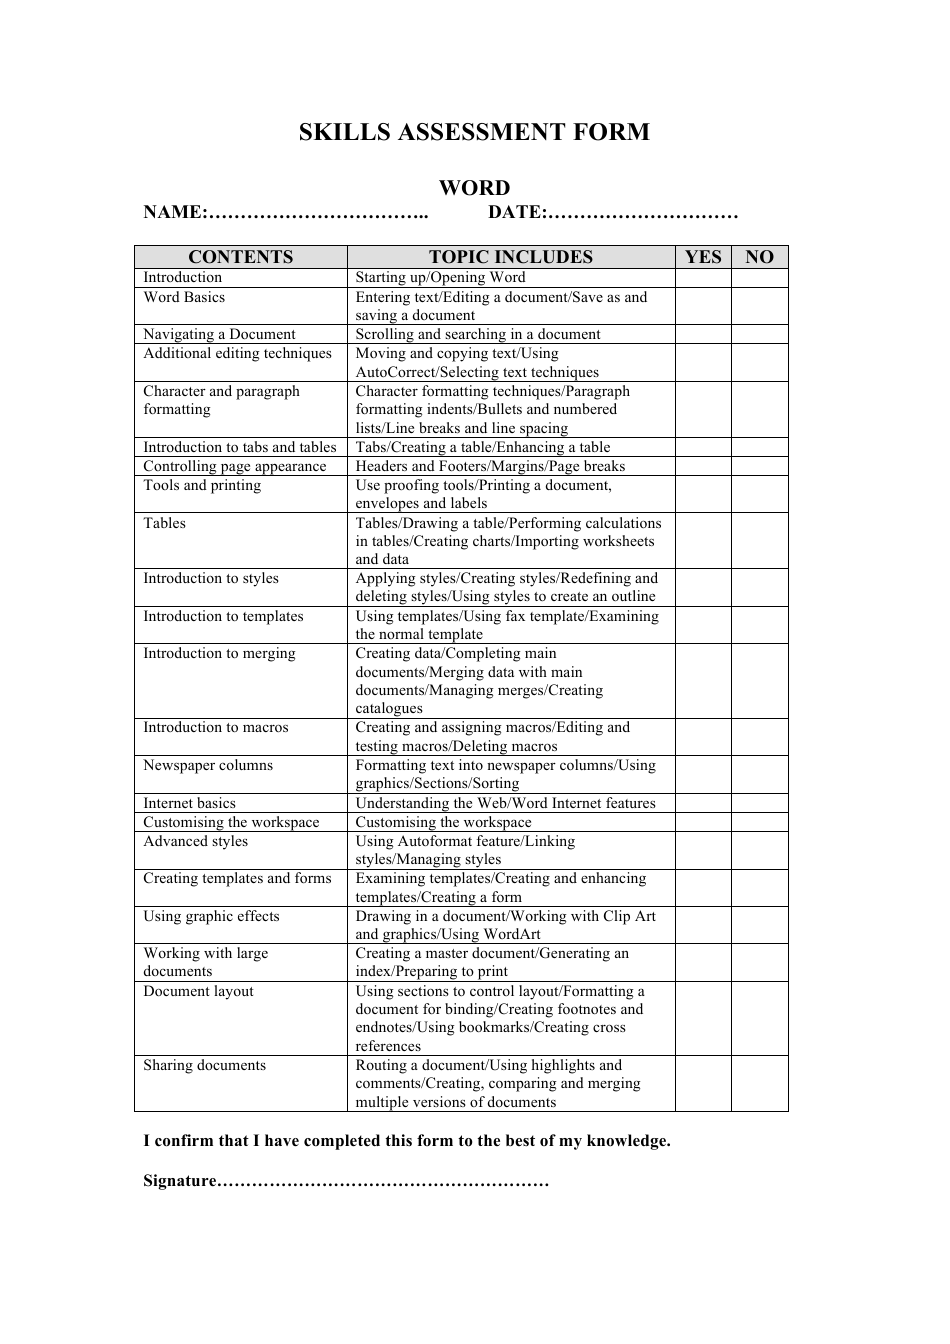 Skills Assessment Form, Page 1